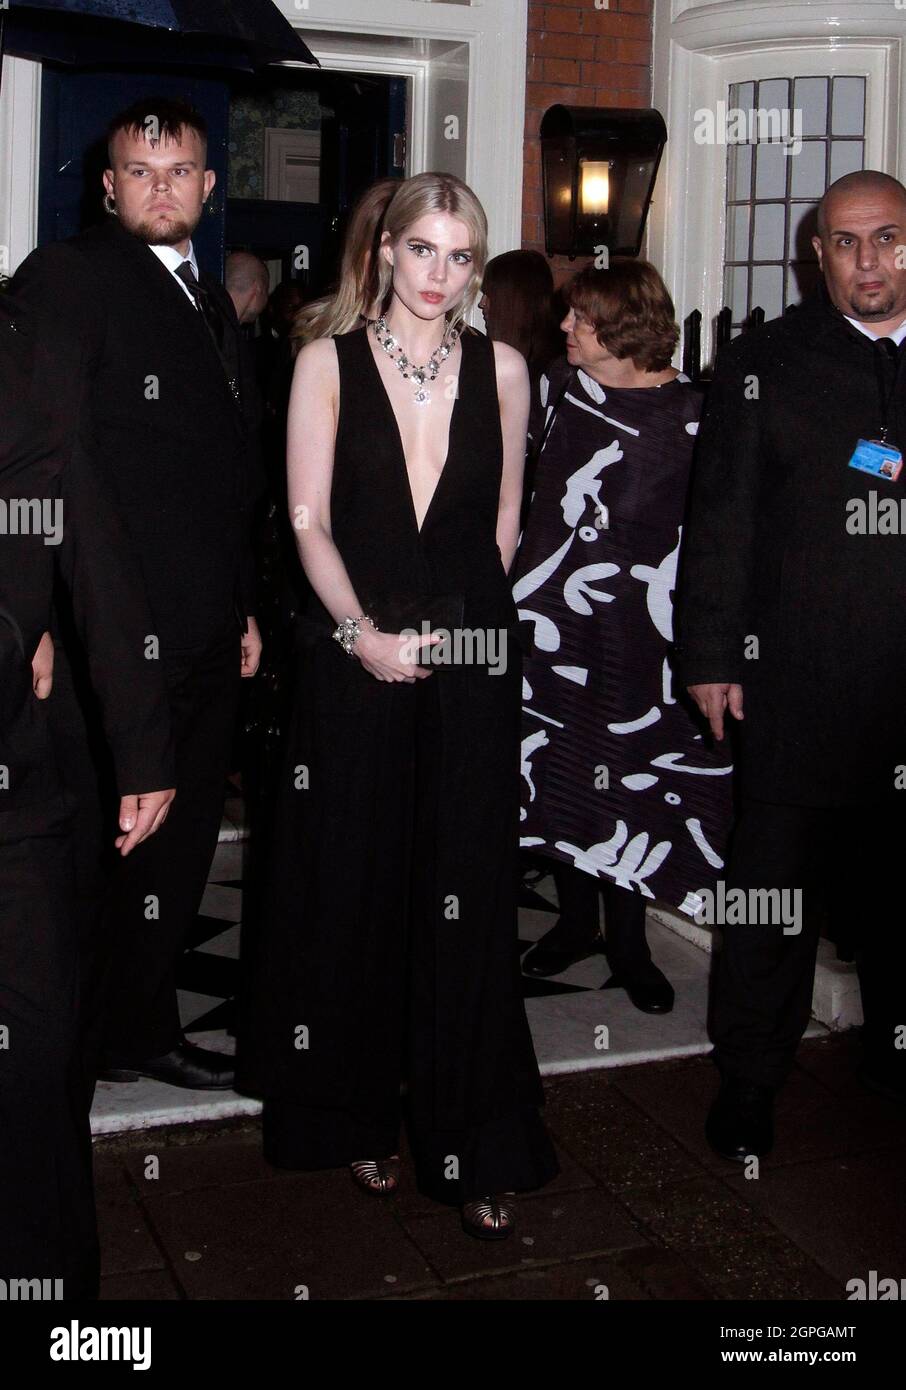 Rami Malek with girlfriend Lucy Boynton Daniel Graig and friend Ana De  Armas Billie Eilish Hans Zimmer Lea Seydoux and many others went to the 007  after party at marks club and